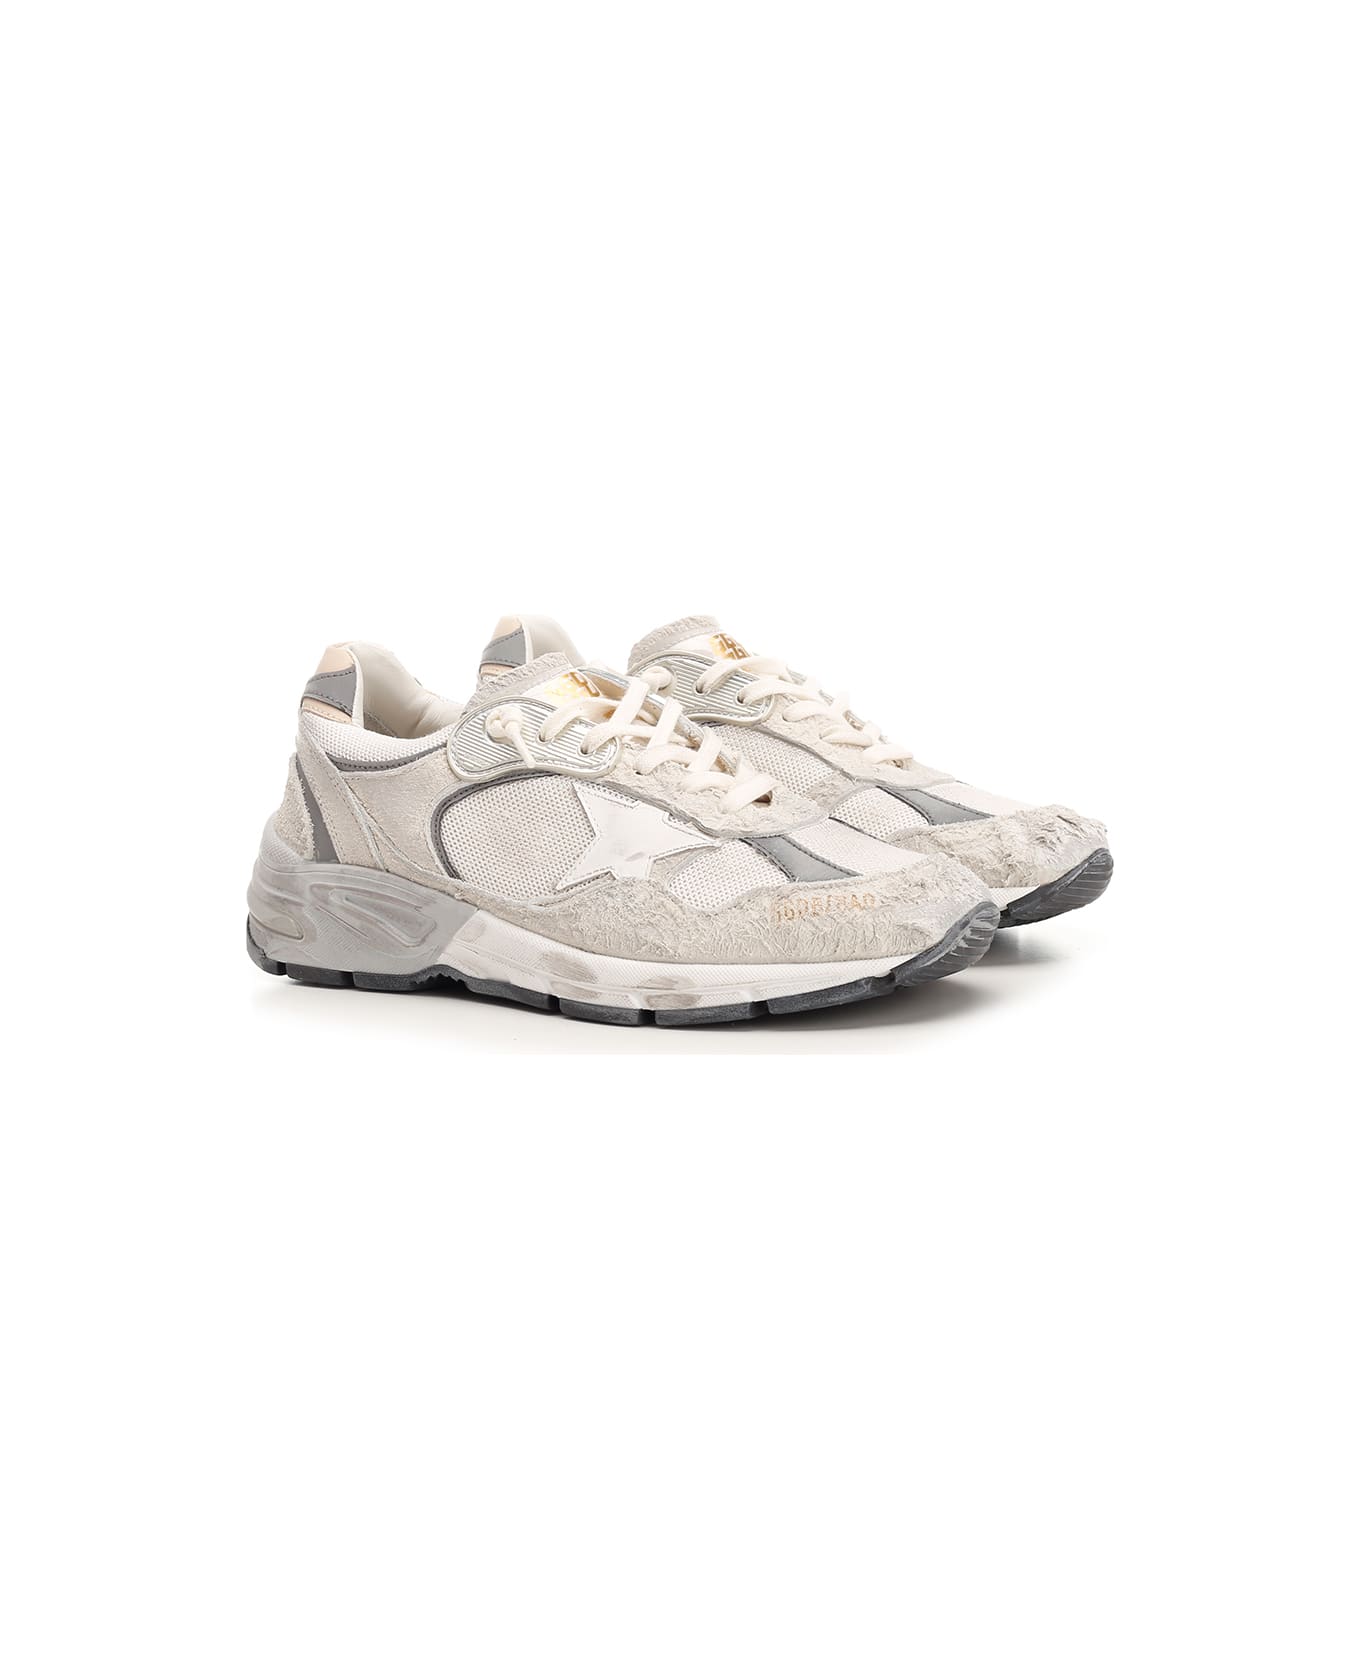 Golden Goose Running Dad Sneakers - White/Silver